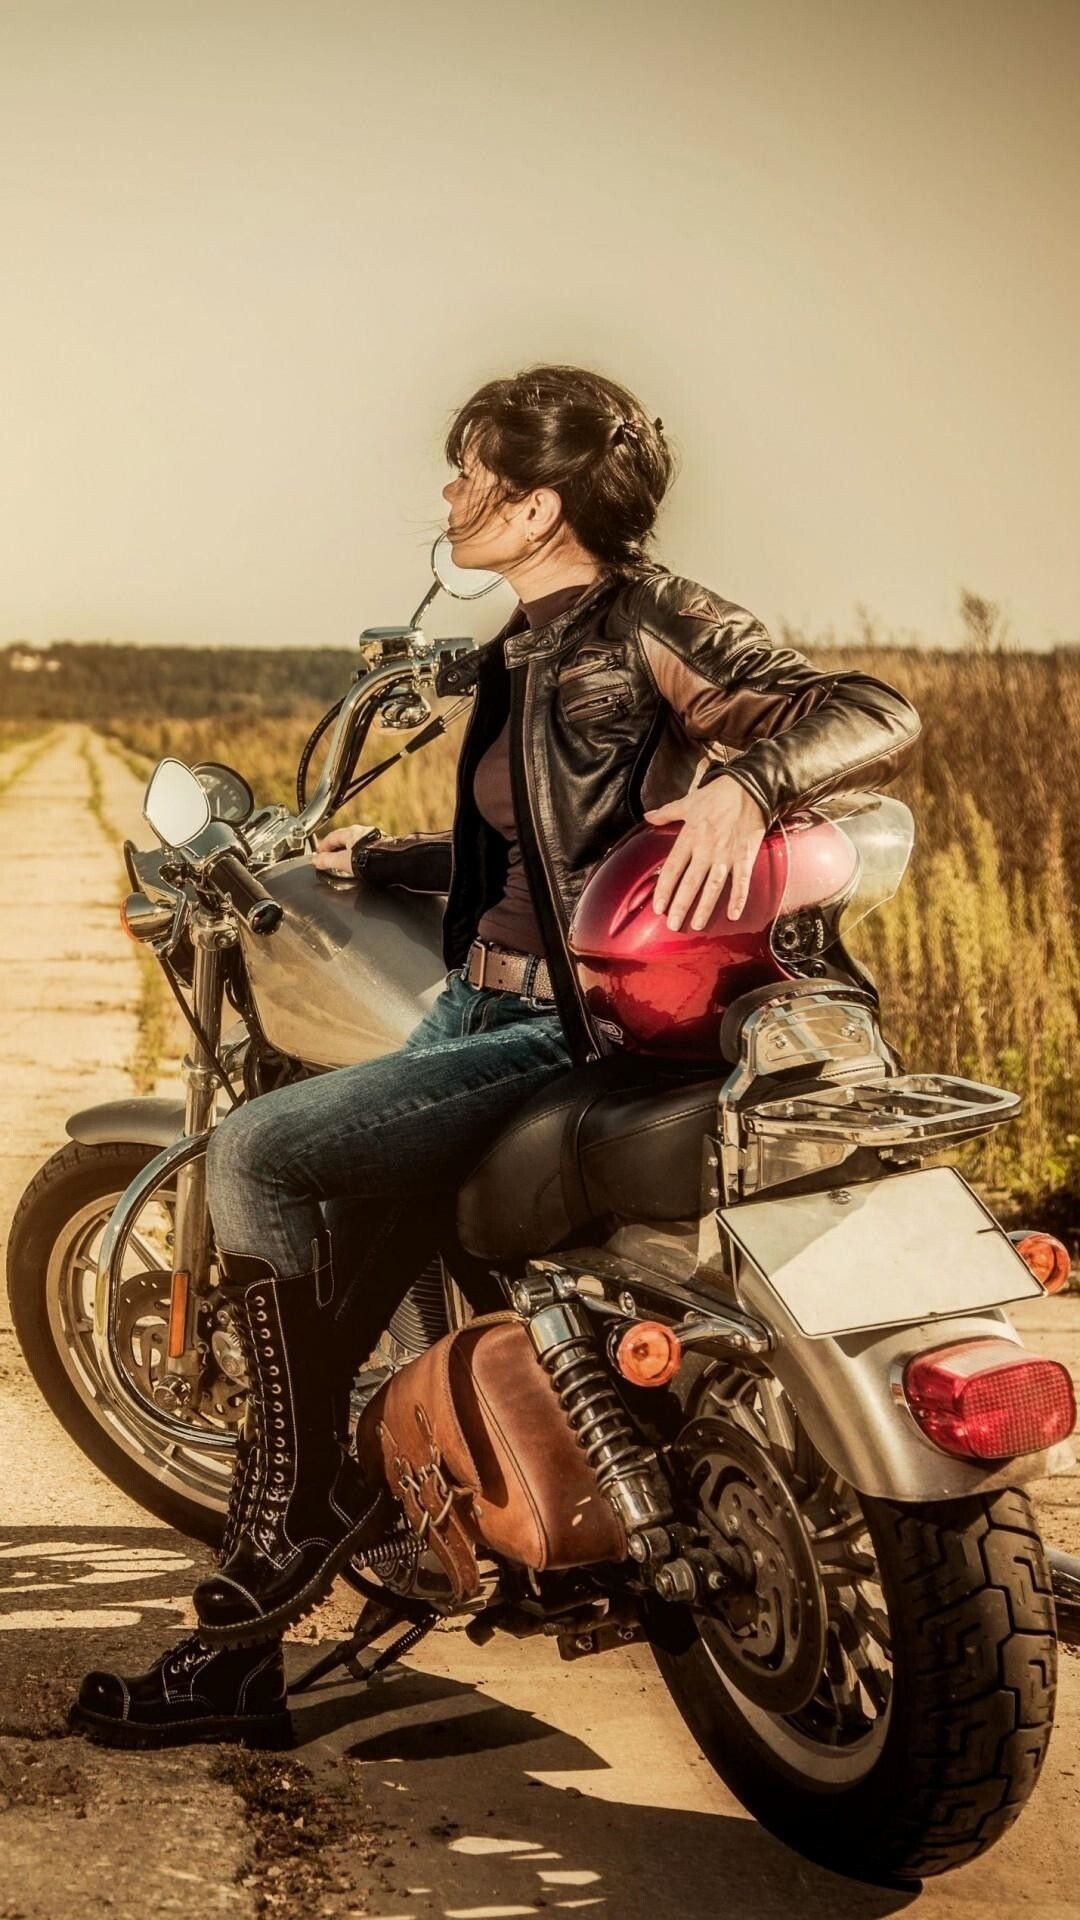 Girls and Motorcycles: Sidebag, Leather jacket, Lace-up boots, Solo motorcycle touring, Riding long distances. 1080x1920 Full HD Wallpaper.